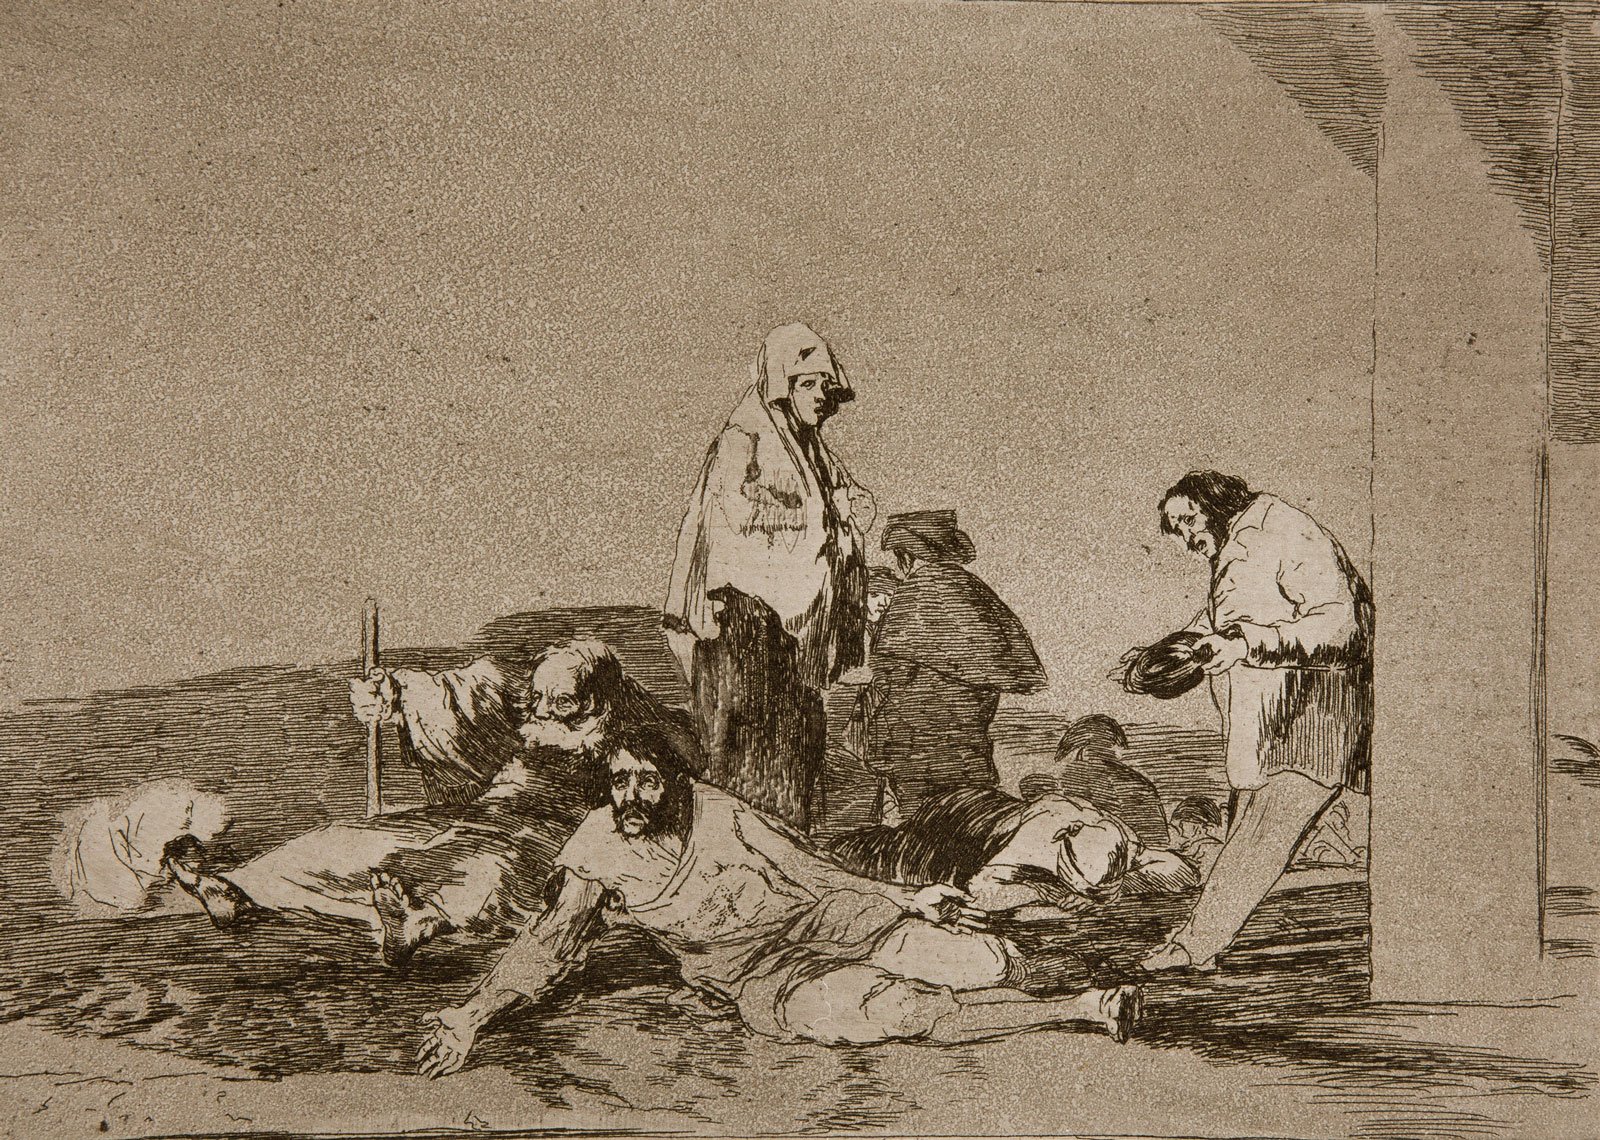 Francisco Goya: It’s No Use Crying Out, 1810-1820